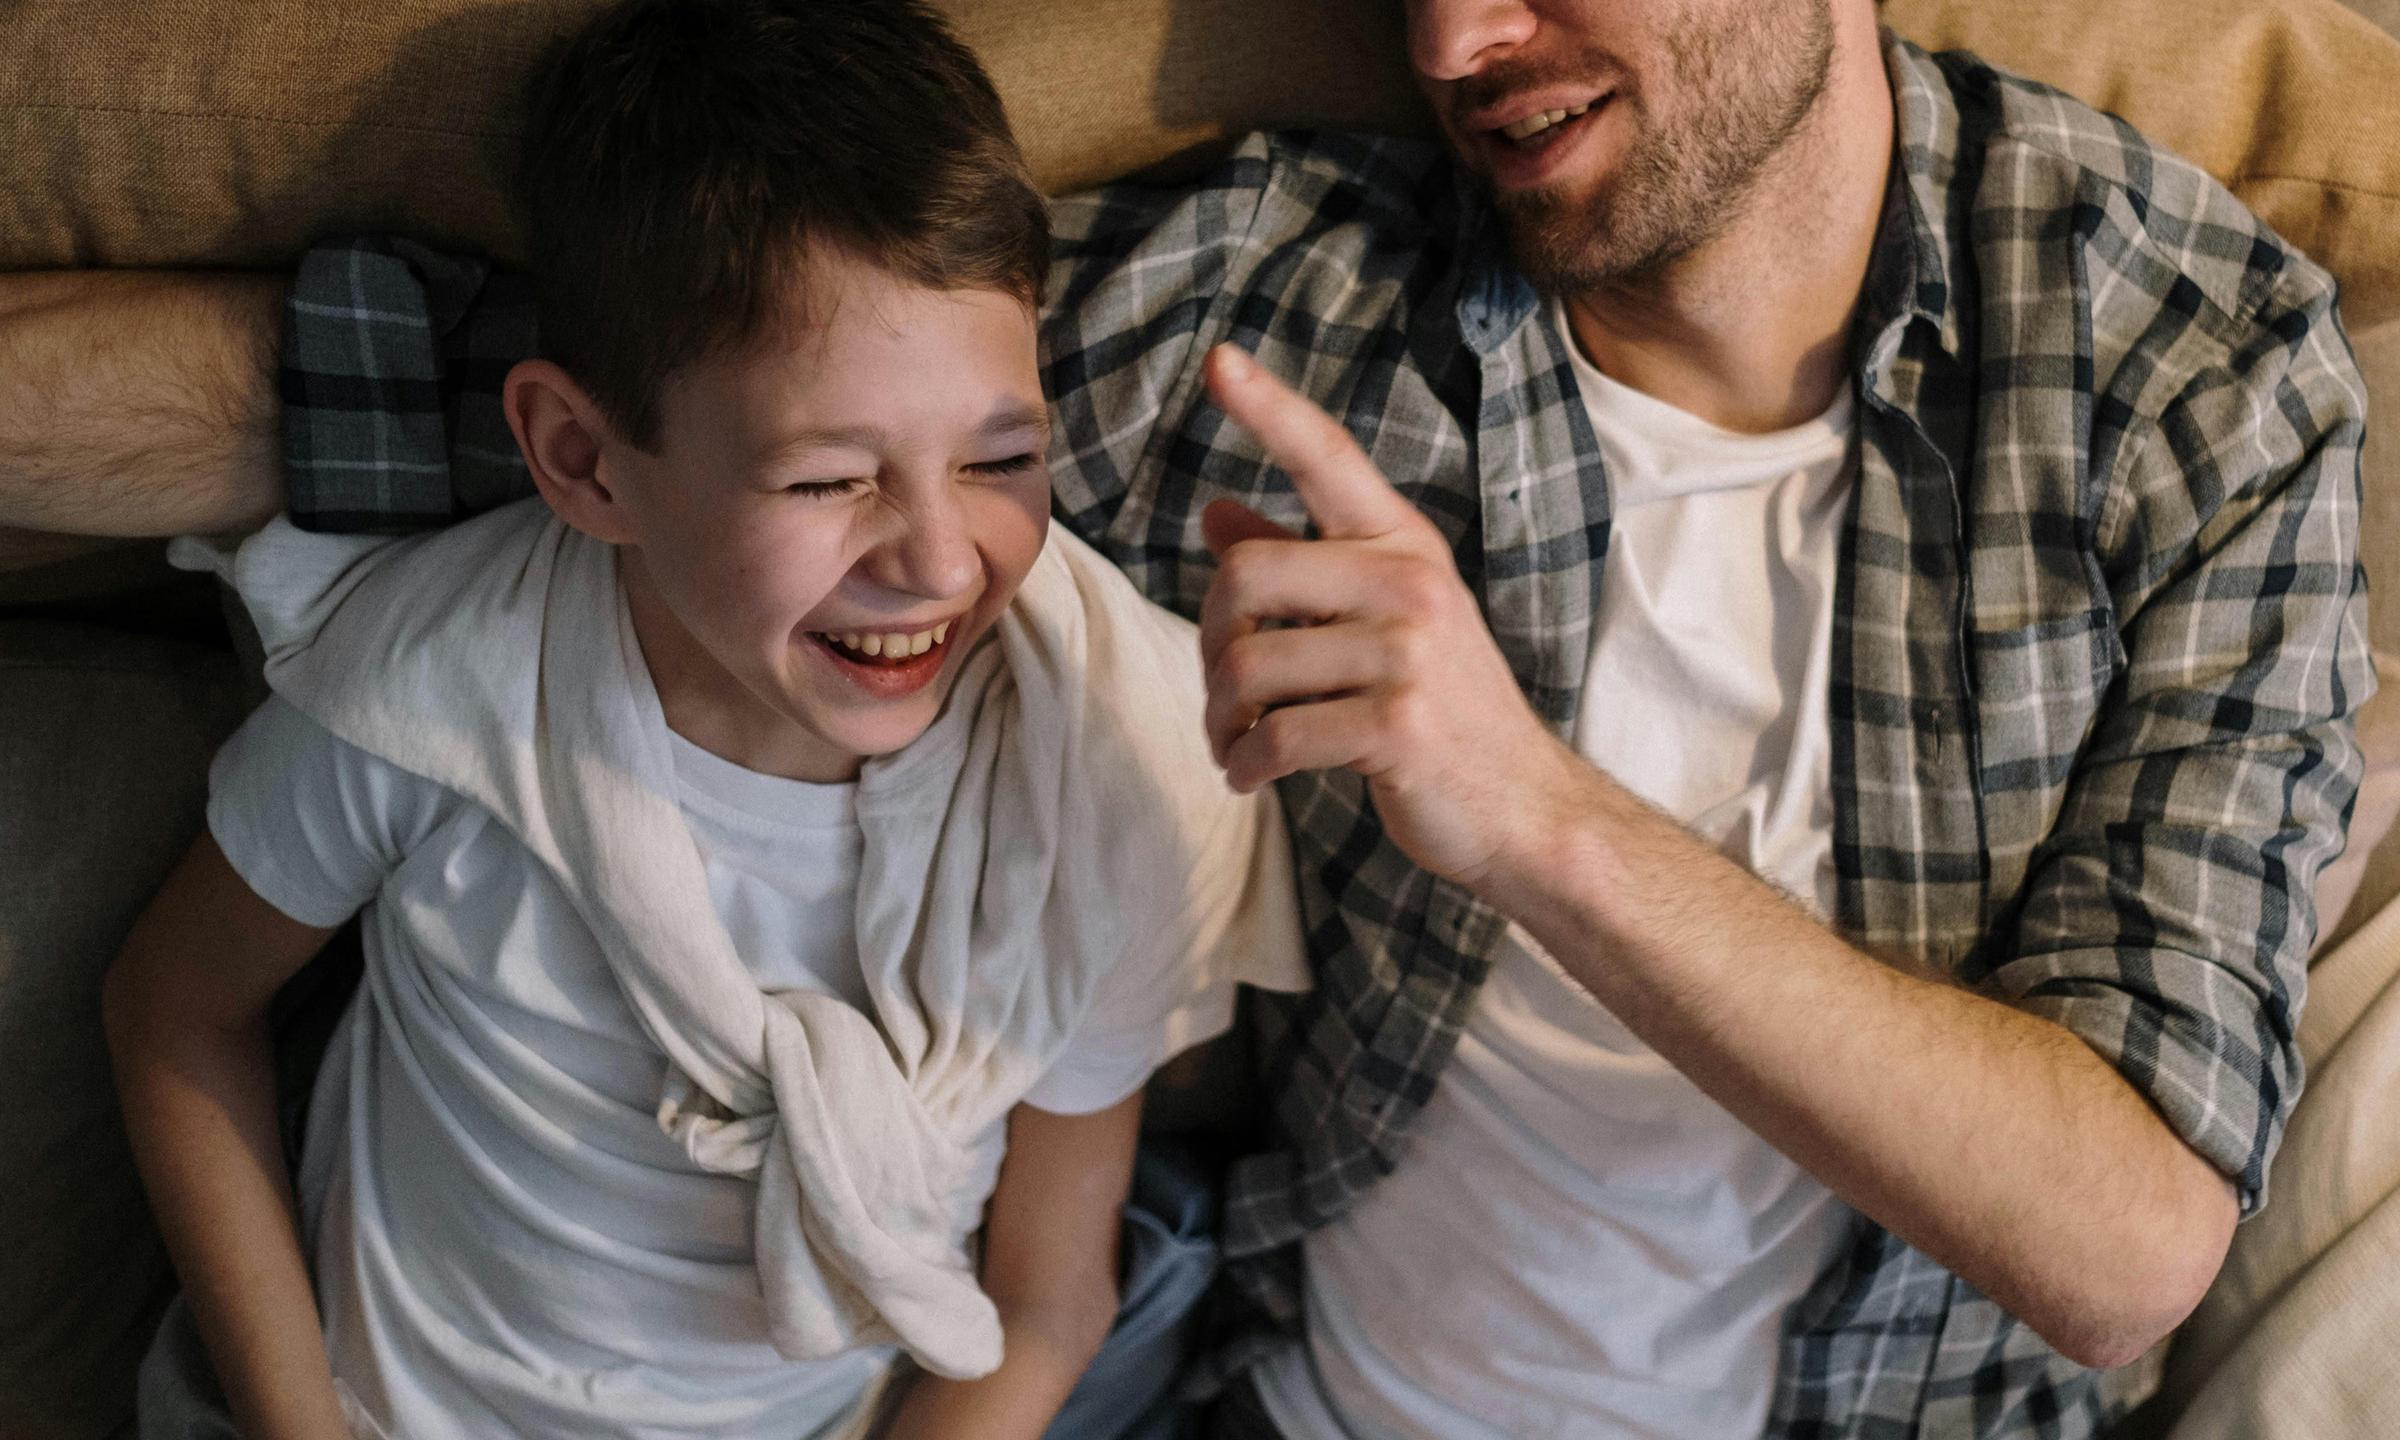 A man and boy laughing together | Source: Pexels